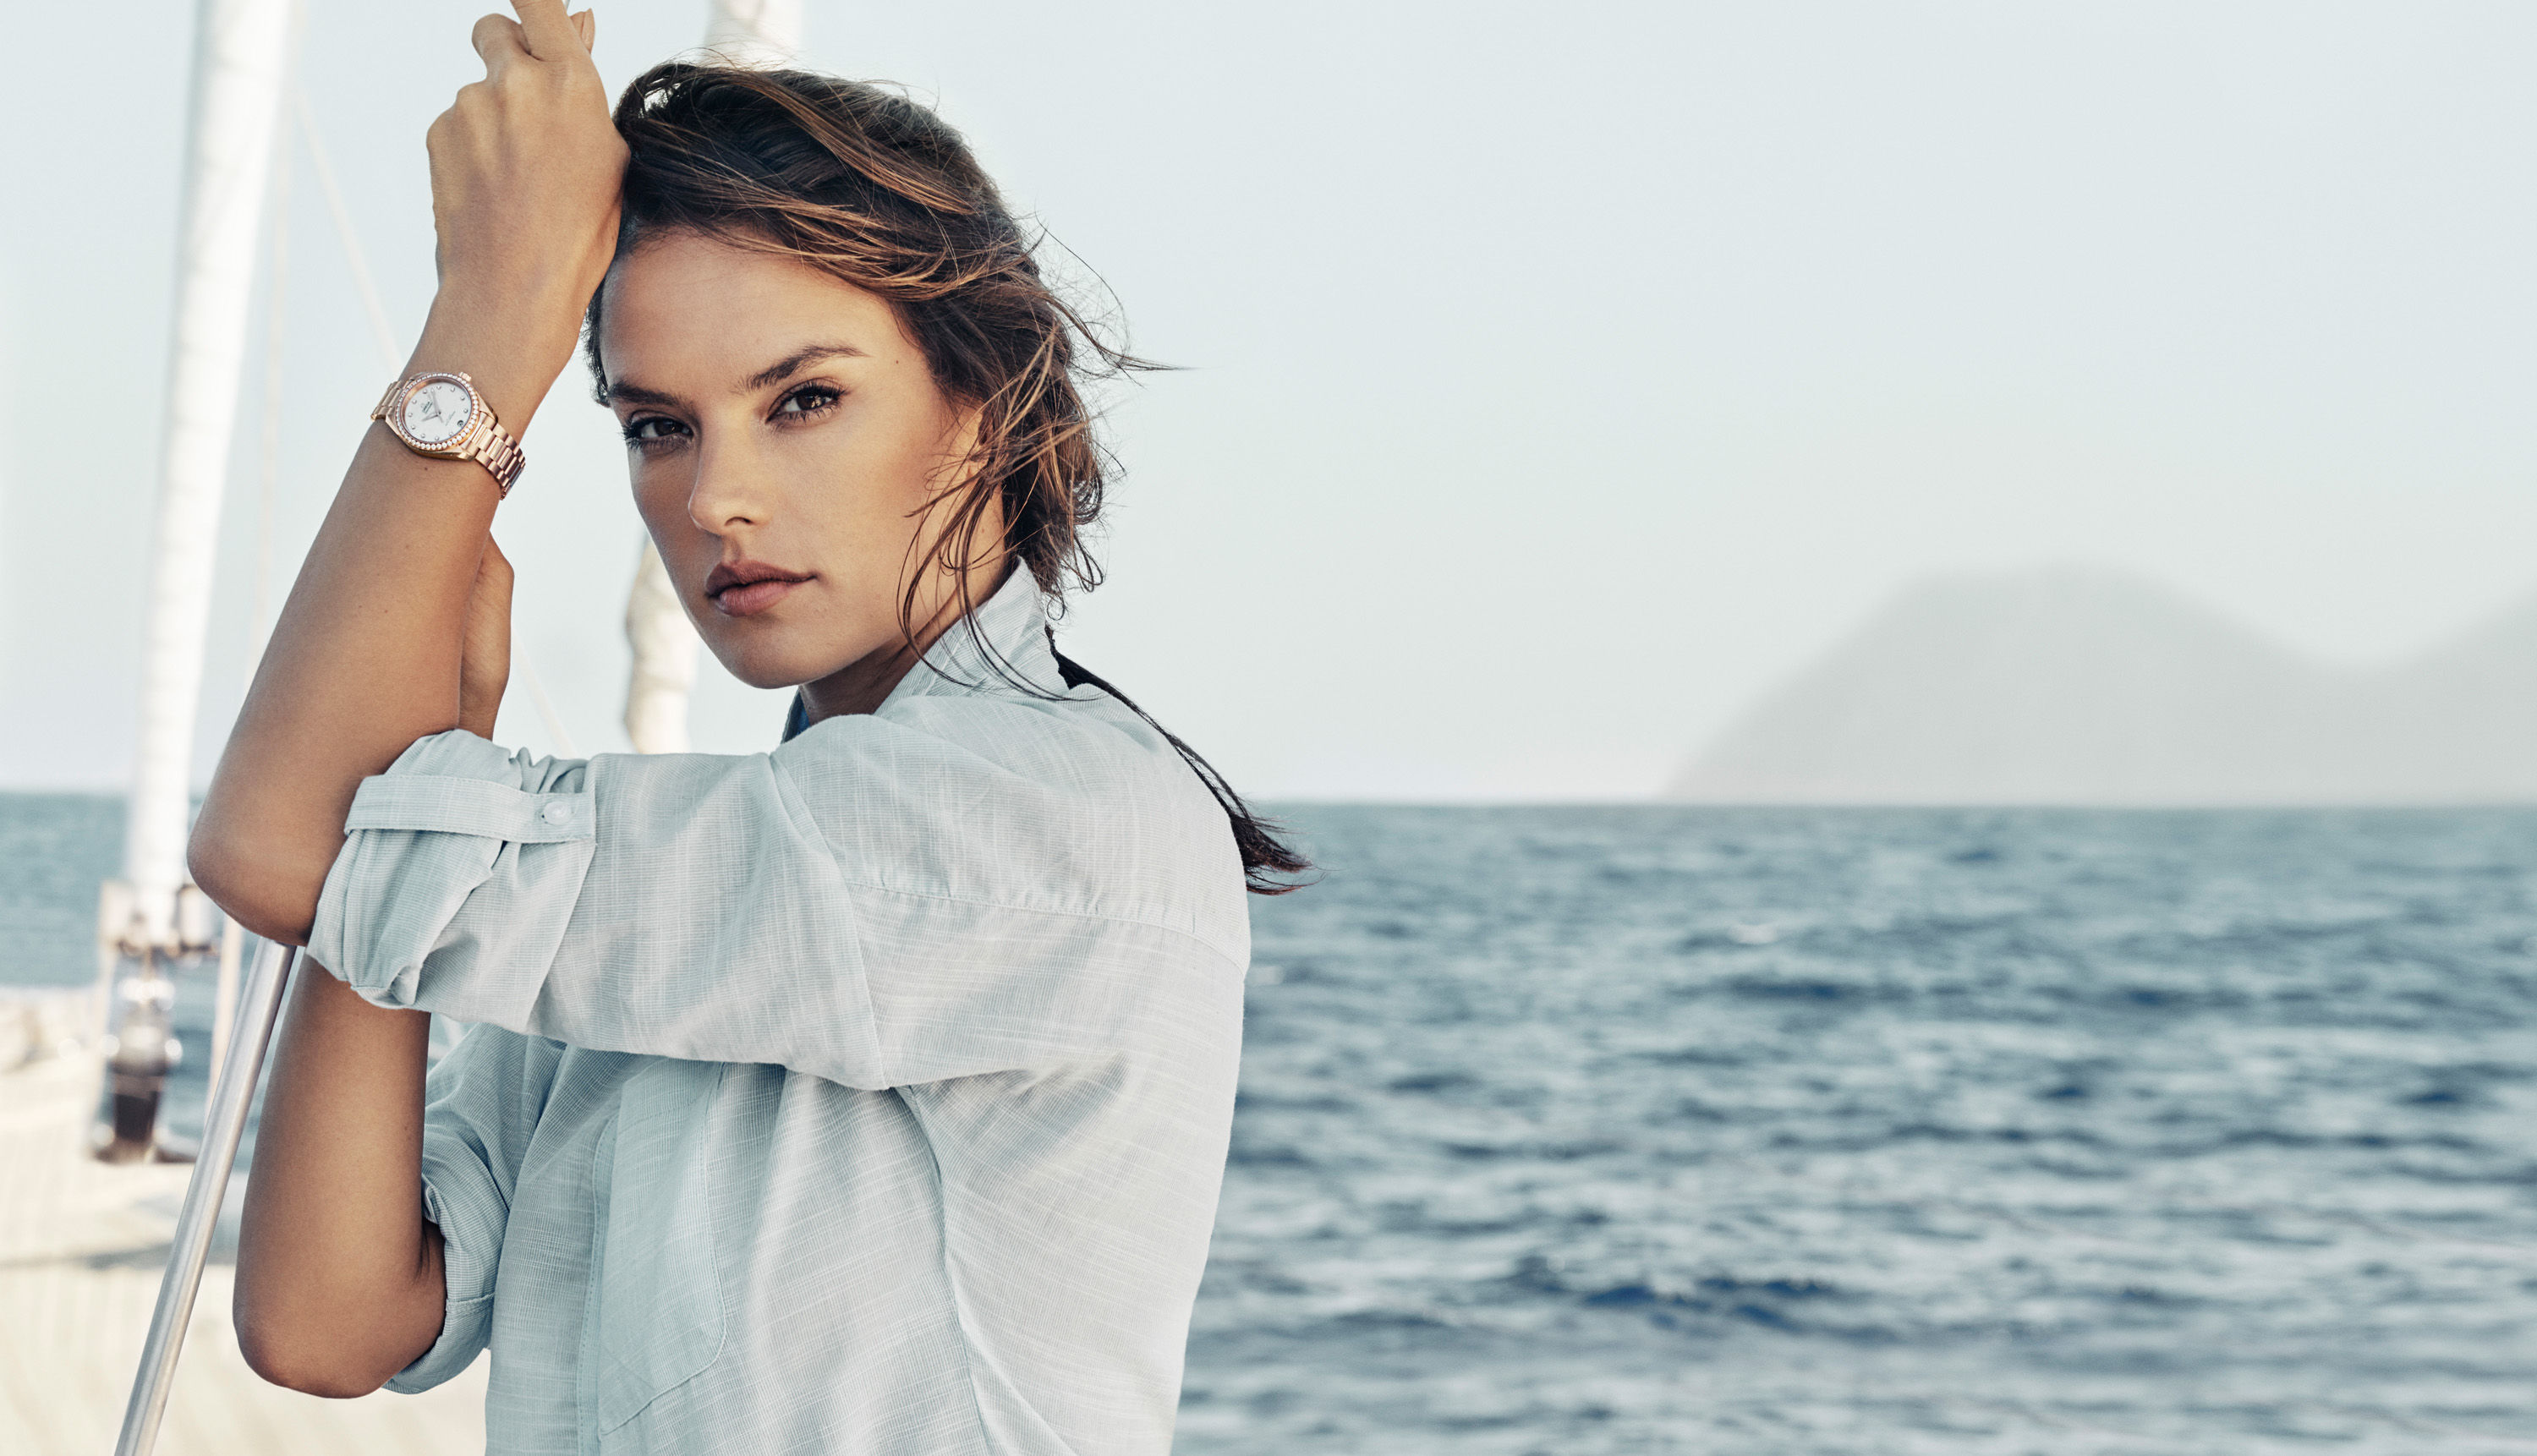 Omega’s latest ladies’ timepieces are perfect for a day at sea